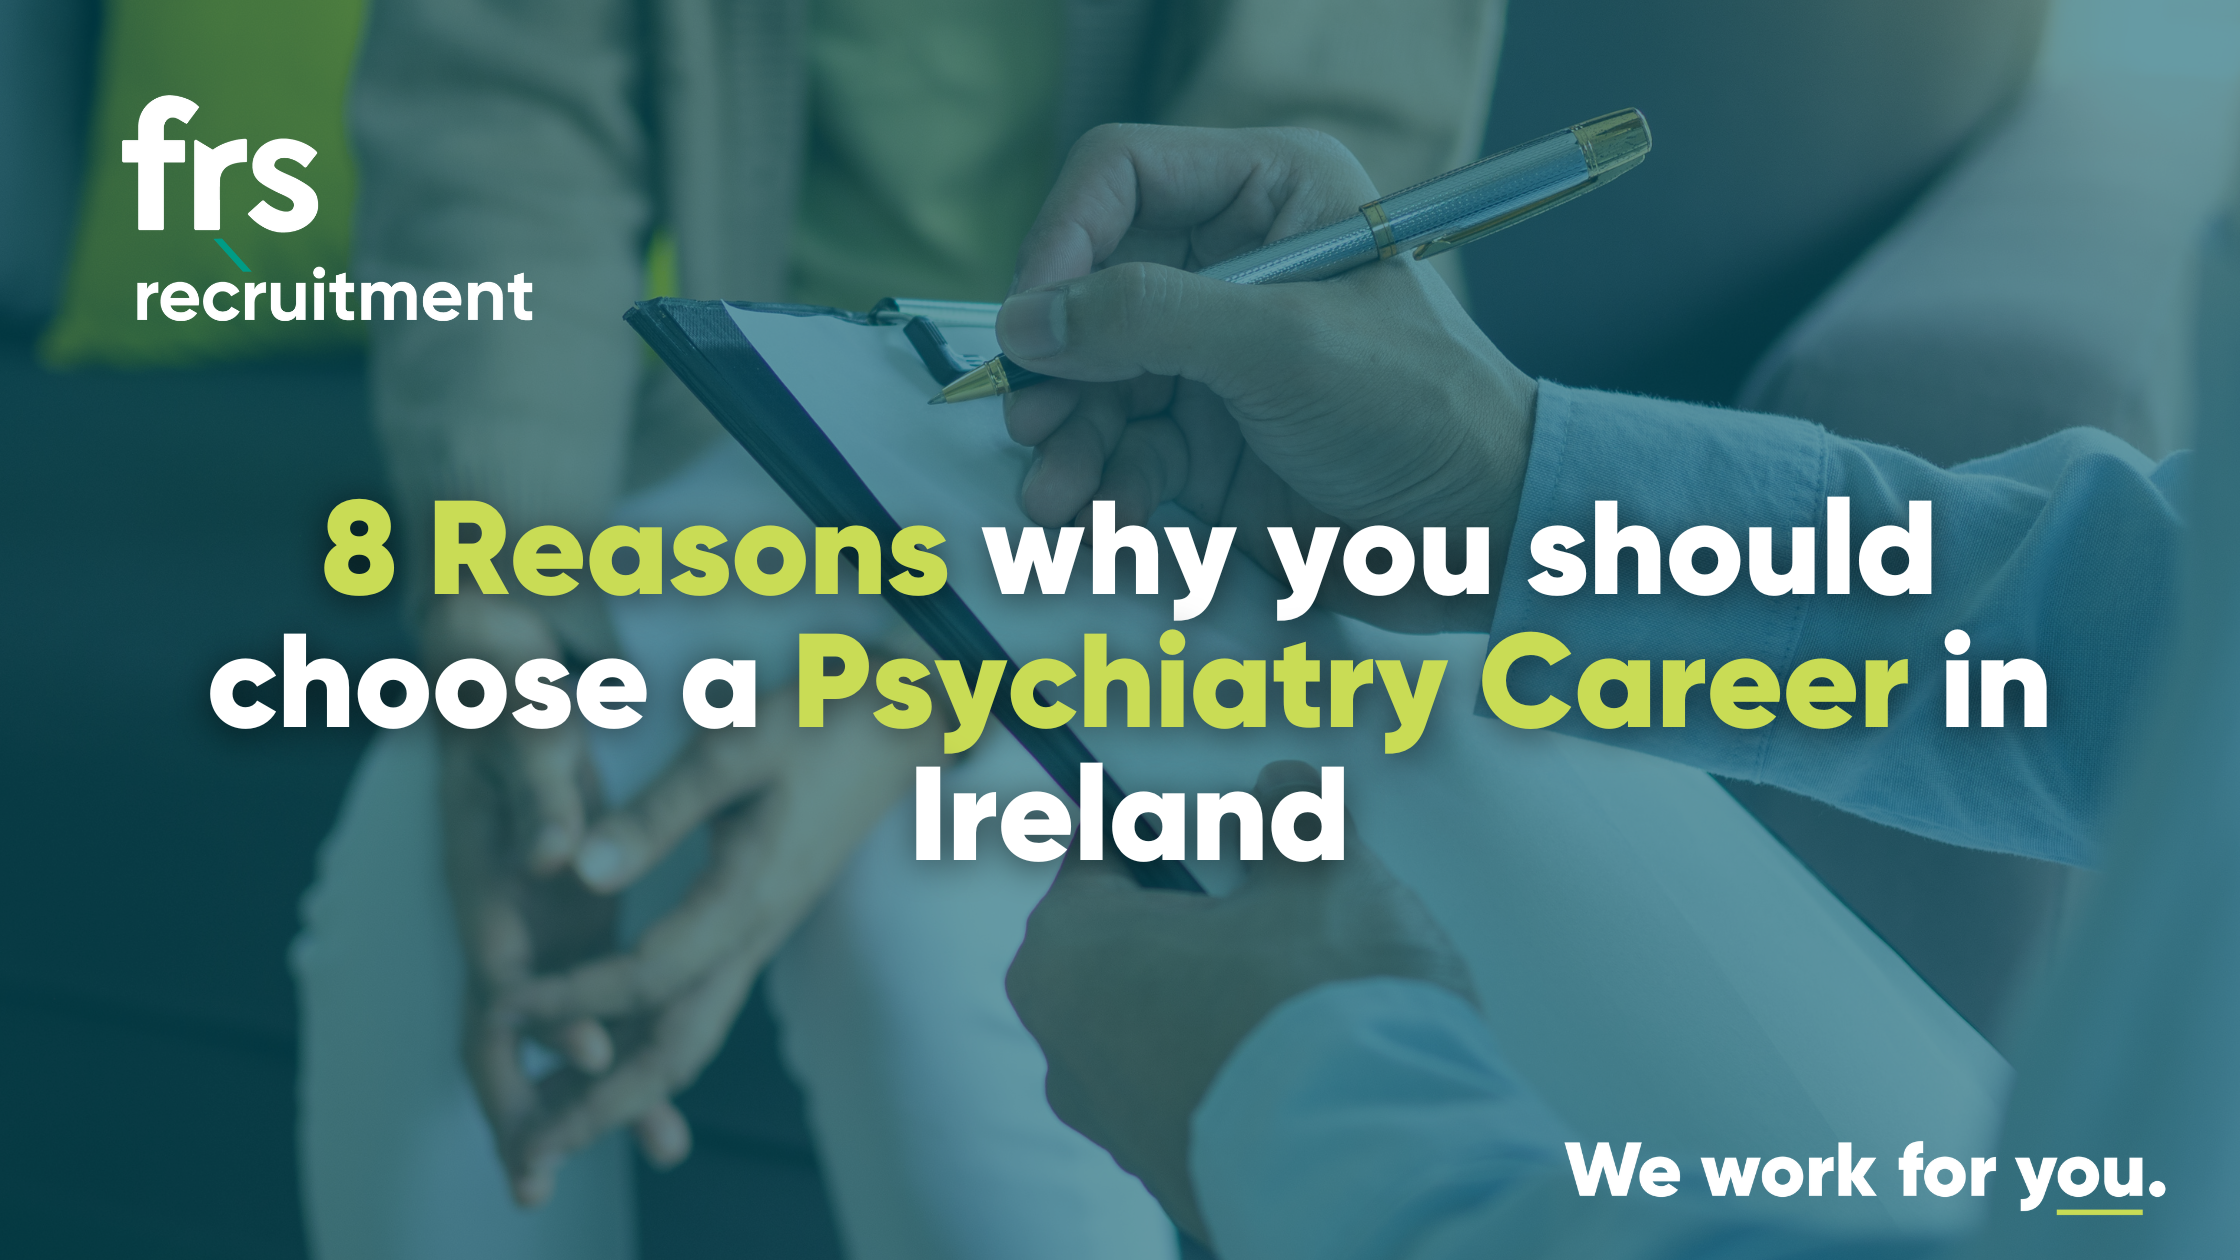 8 Reasons Why You Should Choose a Psychiatry Career in Ireland